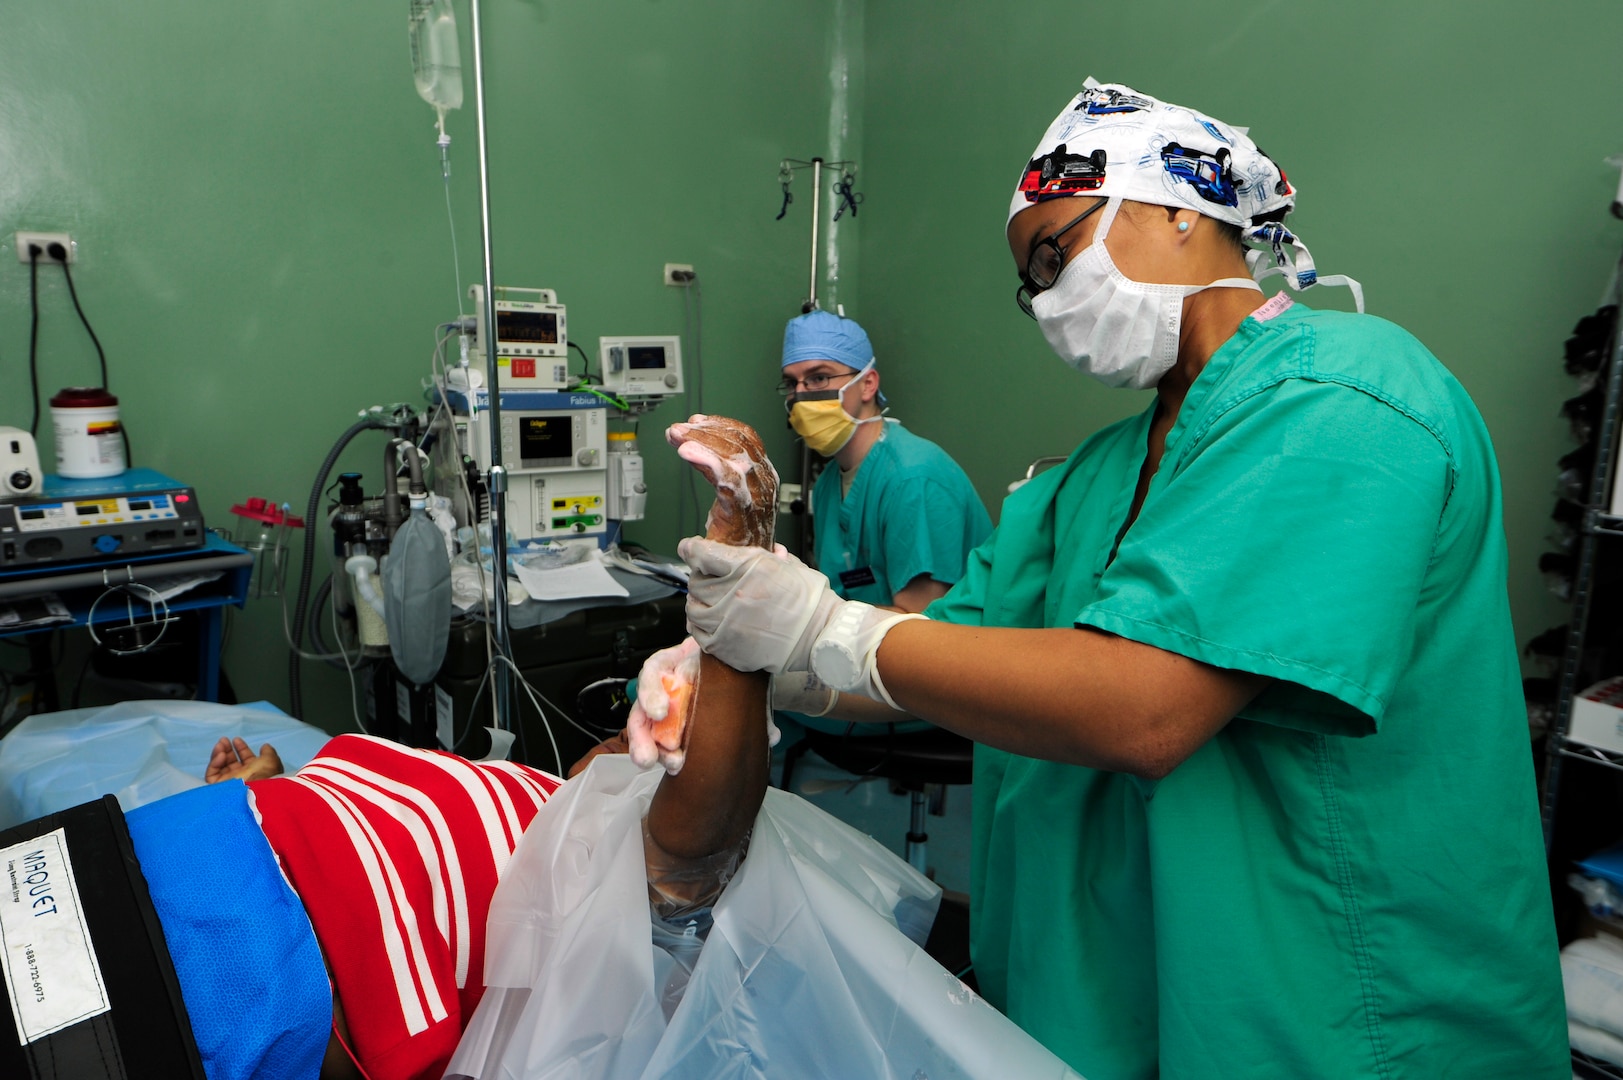 Capt. Lauren Quirao, 506th Expeditionary Medical Operations operating room nurse, cleans Espinal Ledi’s arm in preparation for a bi-lateral carpal tunnel release surgery June 8, at Rio San Juan hospital, Dominican Republic.  Quirao is part of the tenth and final Medical Readiness Training Exercise or MEDRETE rotation during Exercise NEW HORIZONS 2016. Quirao is deployed from the 59th Medical Wing, Joint Base San Antonio, Texas. (U.S. Air Force photo by Master Sgt. Chenzira Mallory/released)